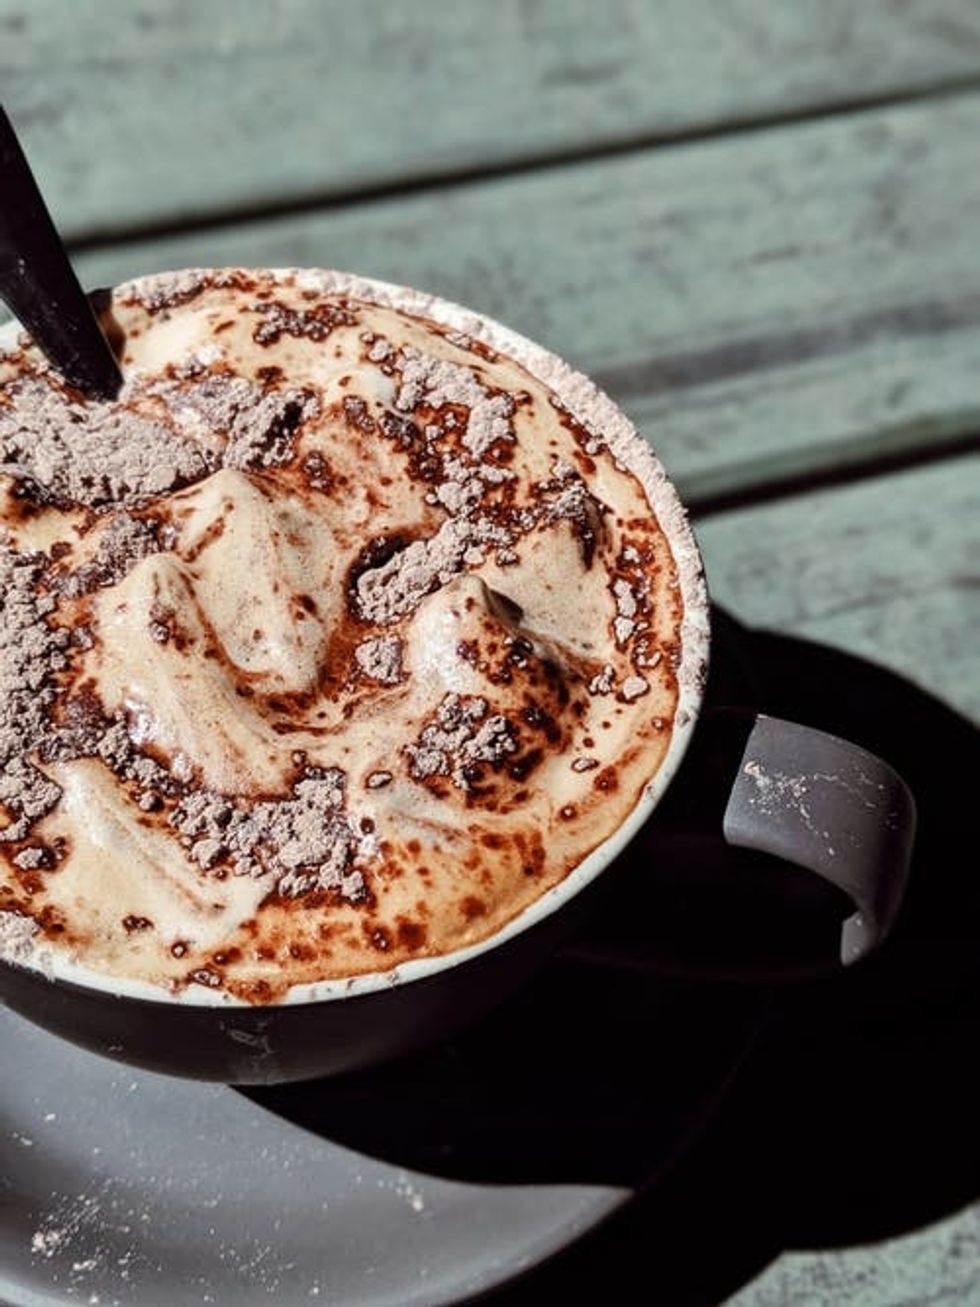 This New Meringue Coffee Trend Is EVERYTHING